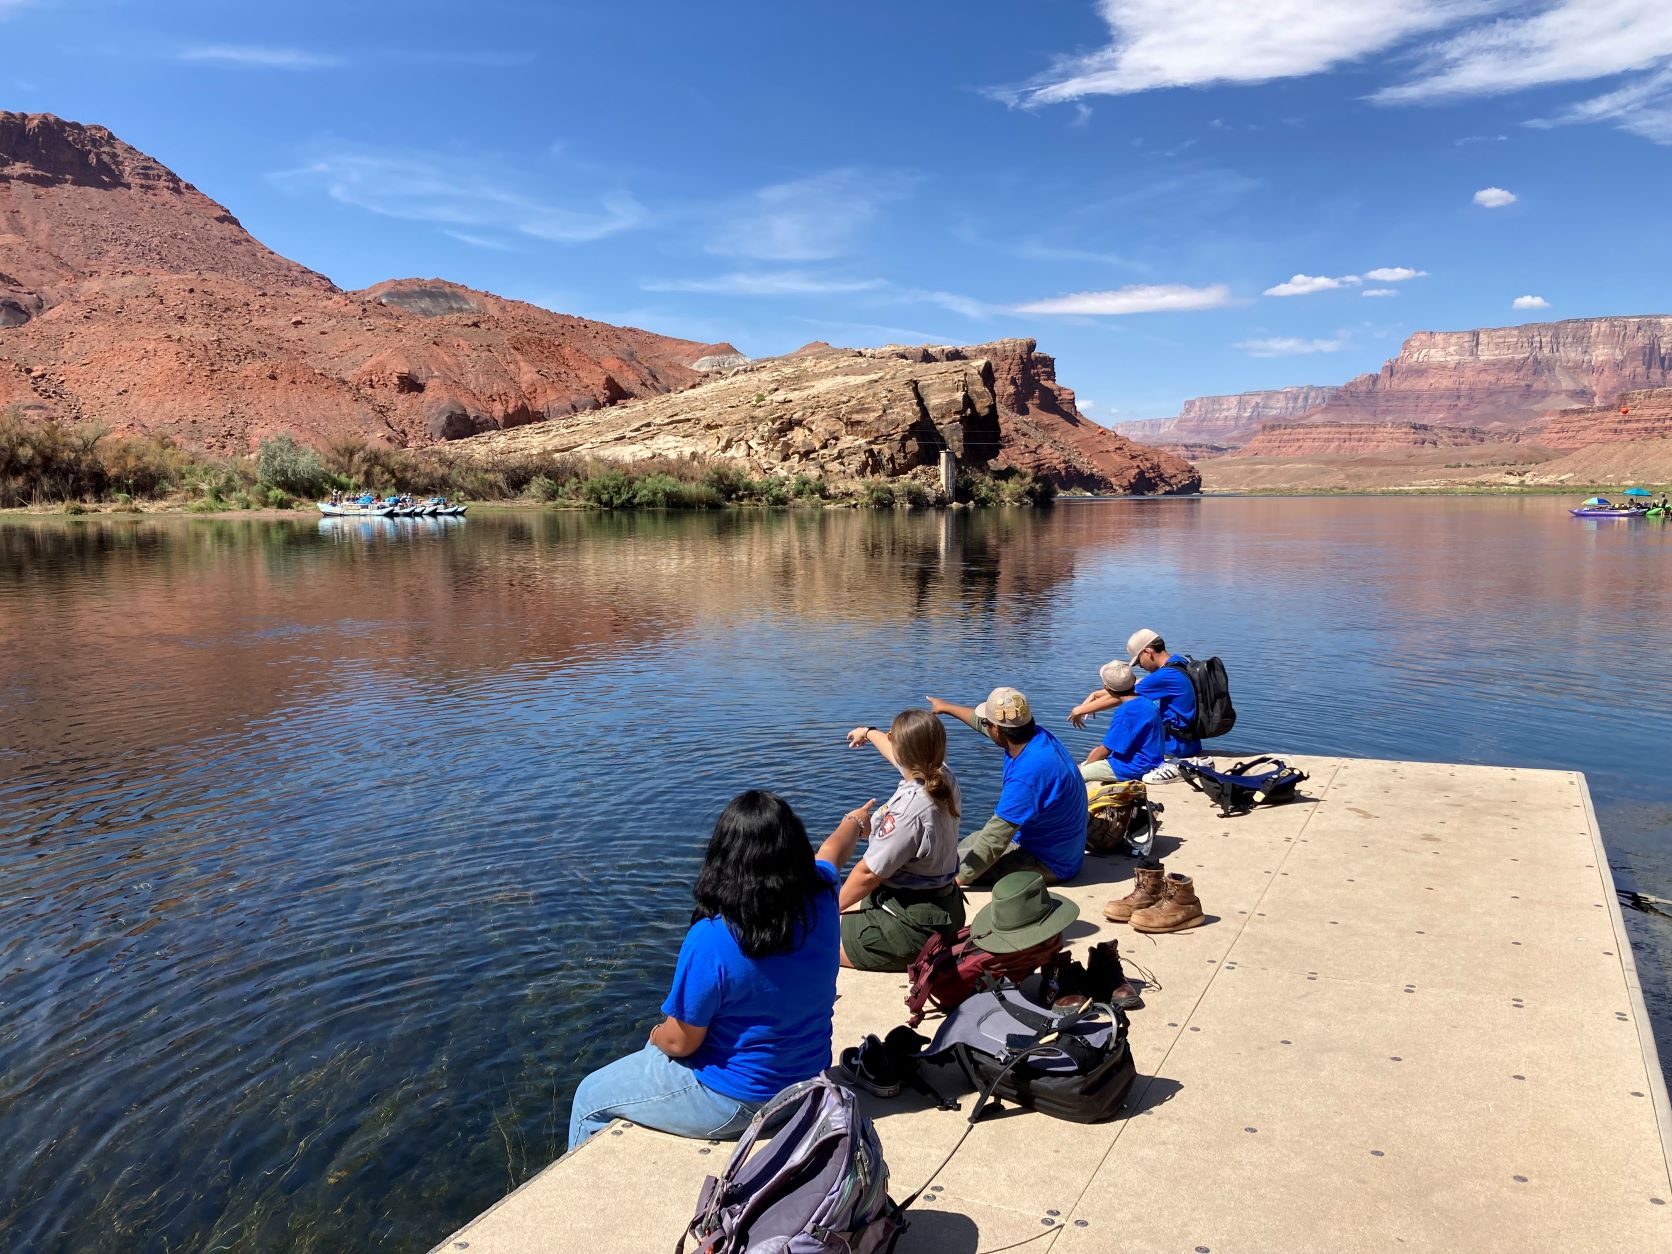 A park ranger sits with children on a river dock with tall canyon walls in the distance.